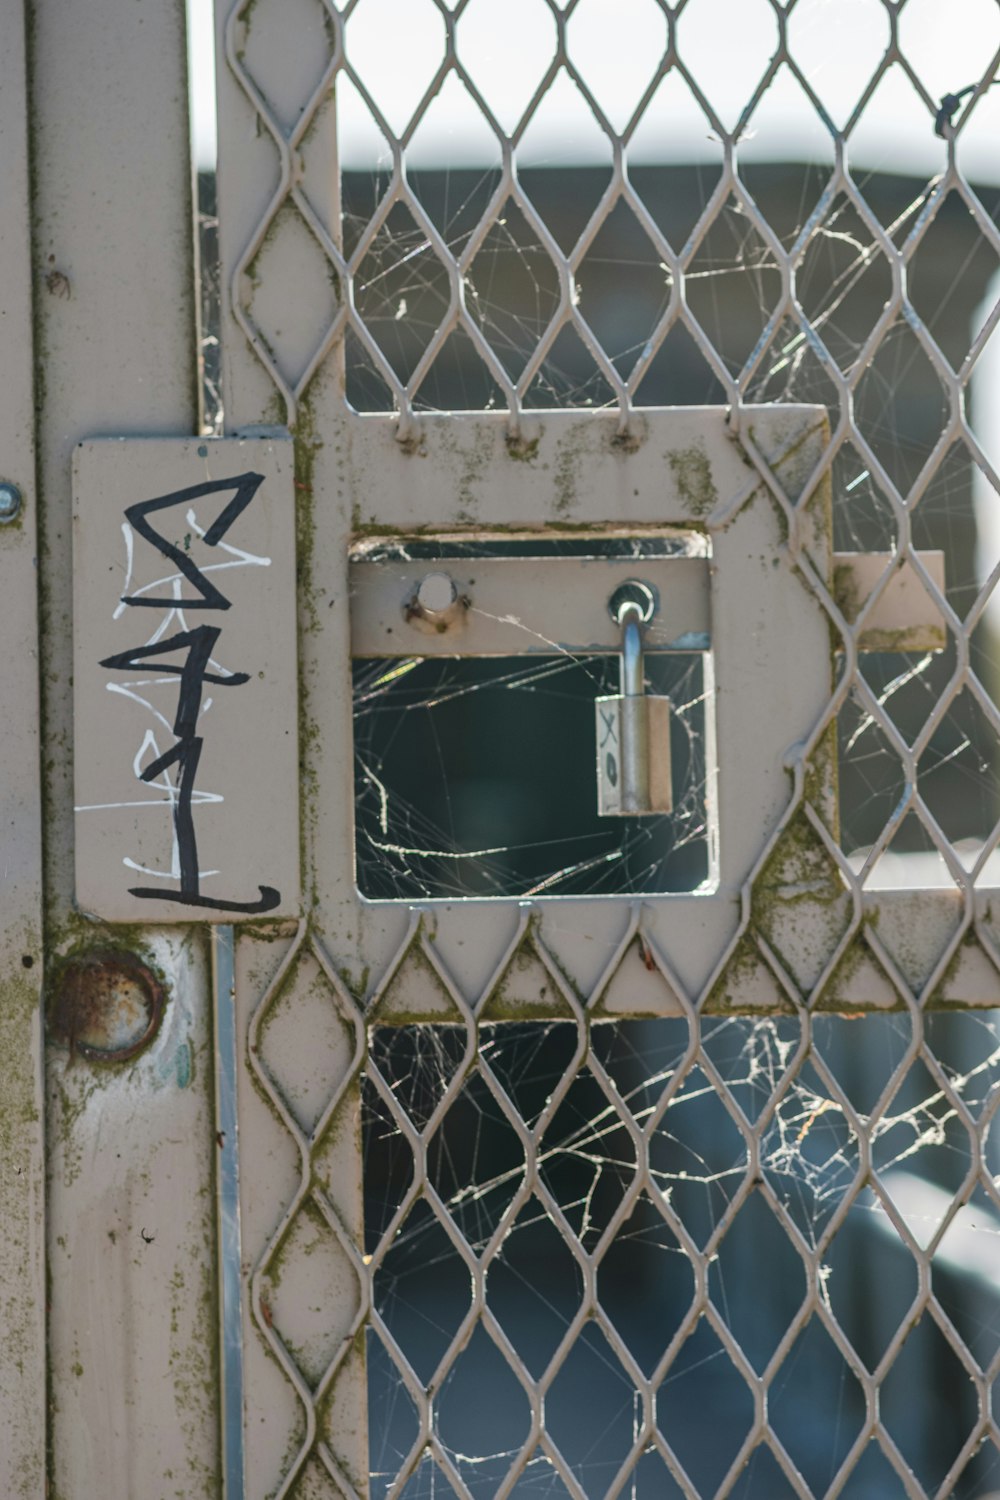 a close up of a metal gate with graffiti on it